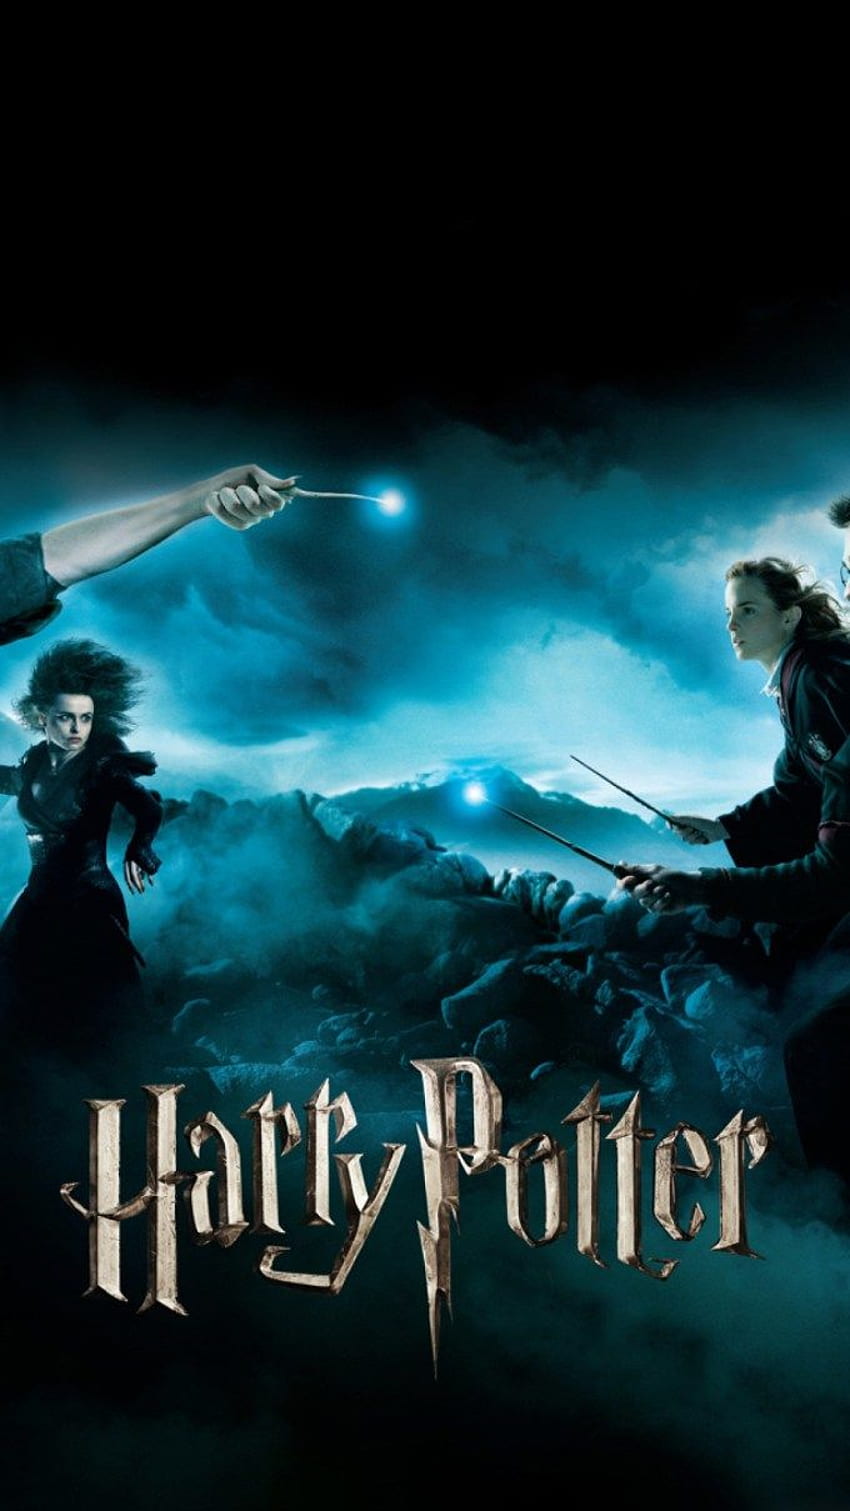 Free download 21 Harry Potter Wallpapers 20 1024x600 1 1440x900 1024x600  for your Desktop Mobile  Tablet  Explore 50 Harry Potter Live Wallpaper   Harry Potter Wallpaper Harry Potter Desktop Backgrounds Harry Potter  Desktop Wallpaper